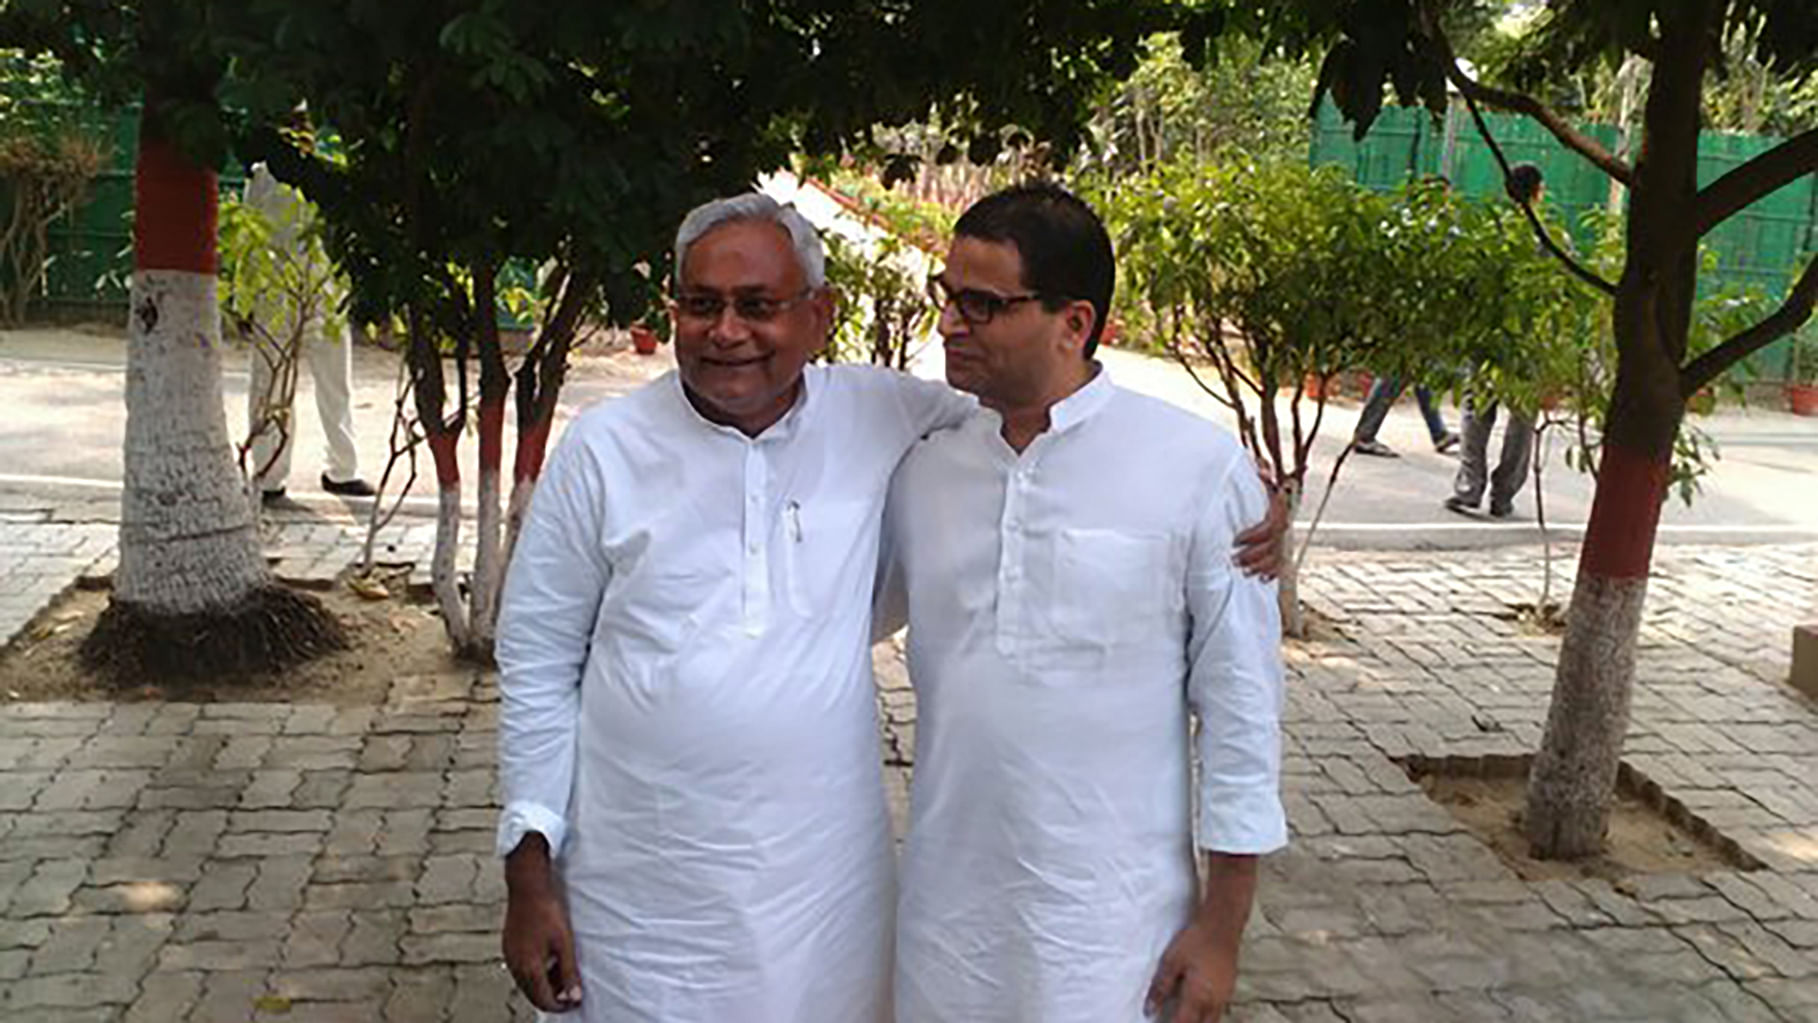 Nitish Kumar with Prashant Kishor after the trends made it
clear that JDU+ would come out as the clear winner. (Photo: <a href="https://twitter.com/SanjayBragta/status/663282131662188544">Twitter</a>)